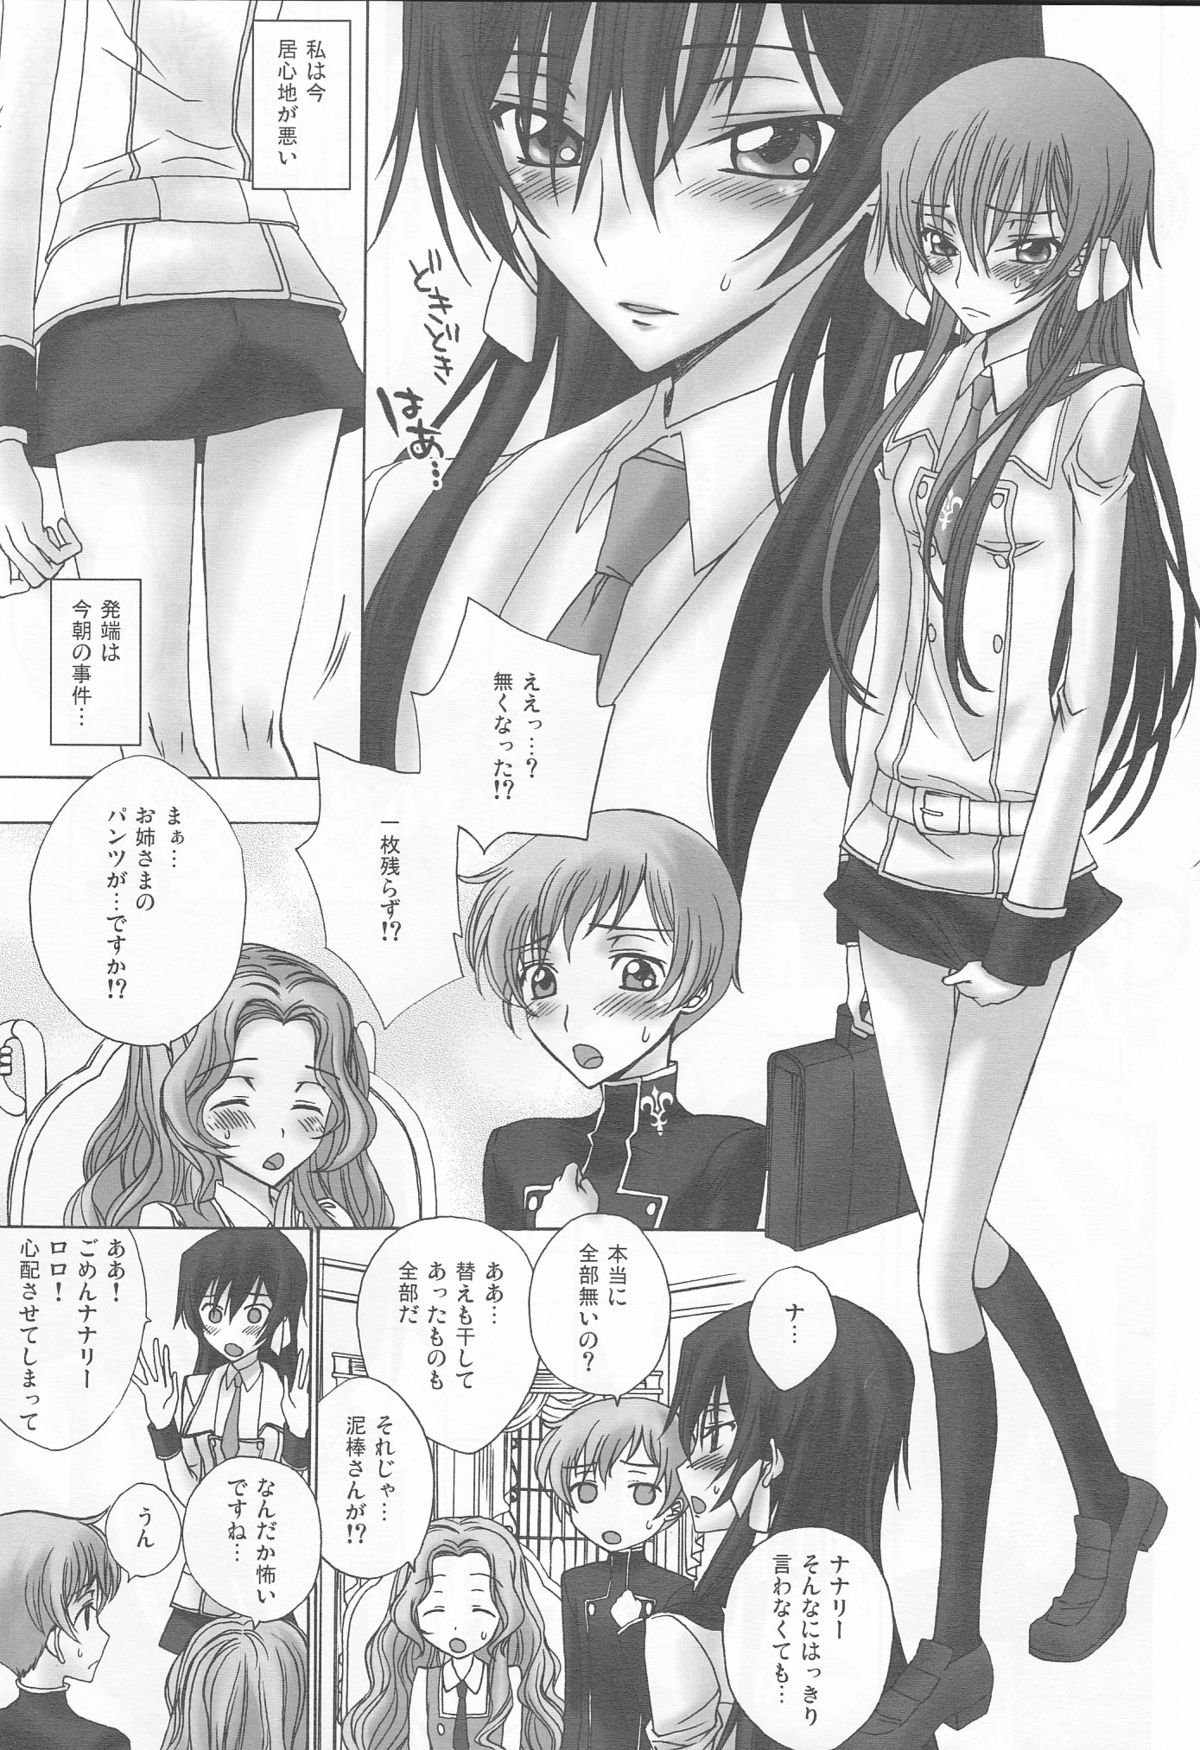 [MAX&COOL. (Sawamura Kina)] Lyrical Rule StrikerS (CODE GEASS: Lelouch of the Rebellion) page 5 full